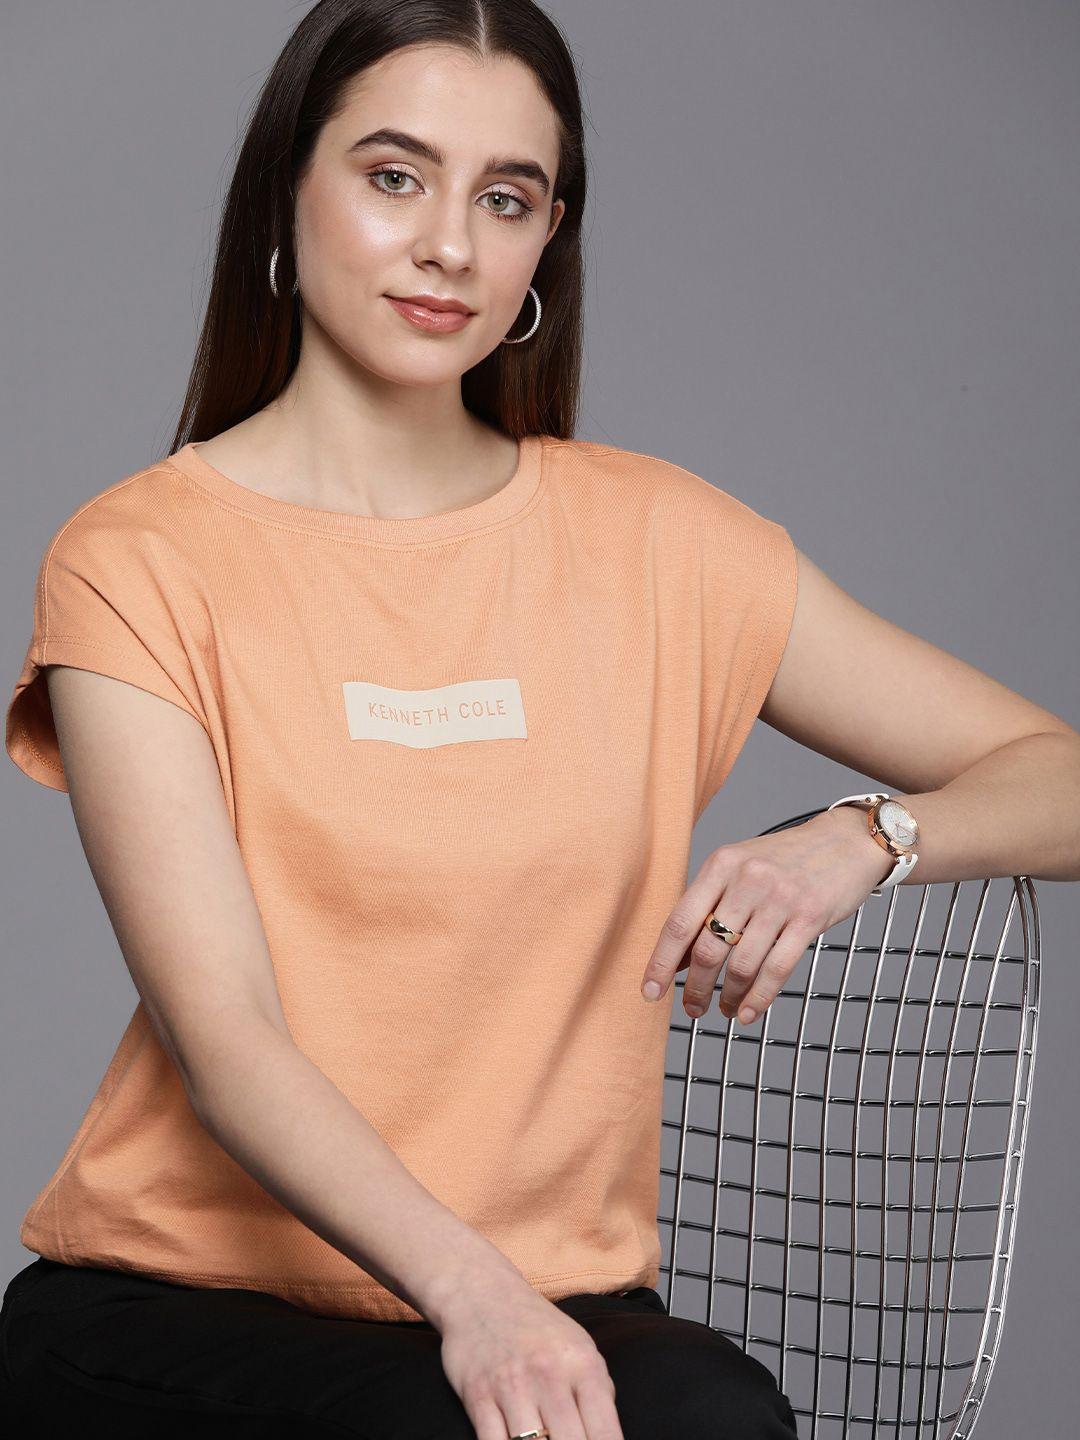 kenneth cole signature tee women peach brand logo extended sleeves pure cotton t-shirt